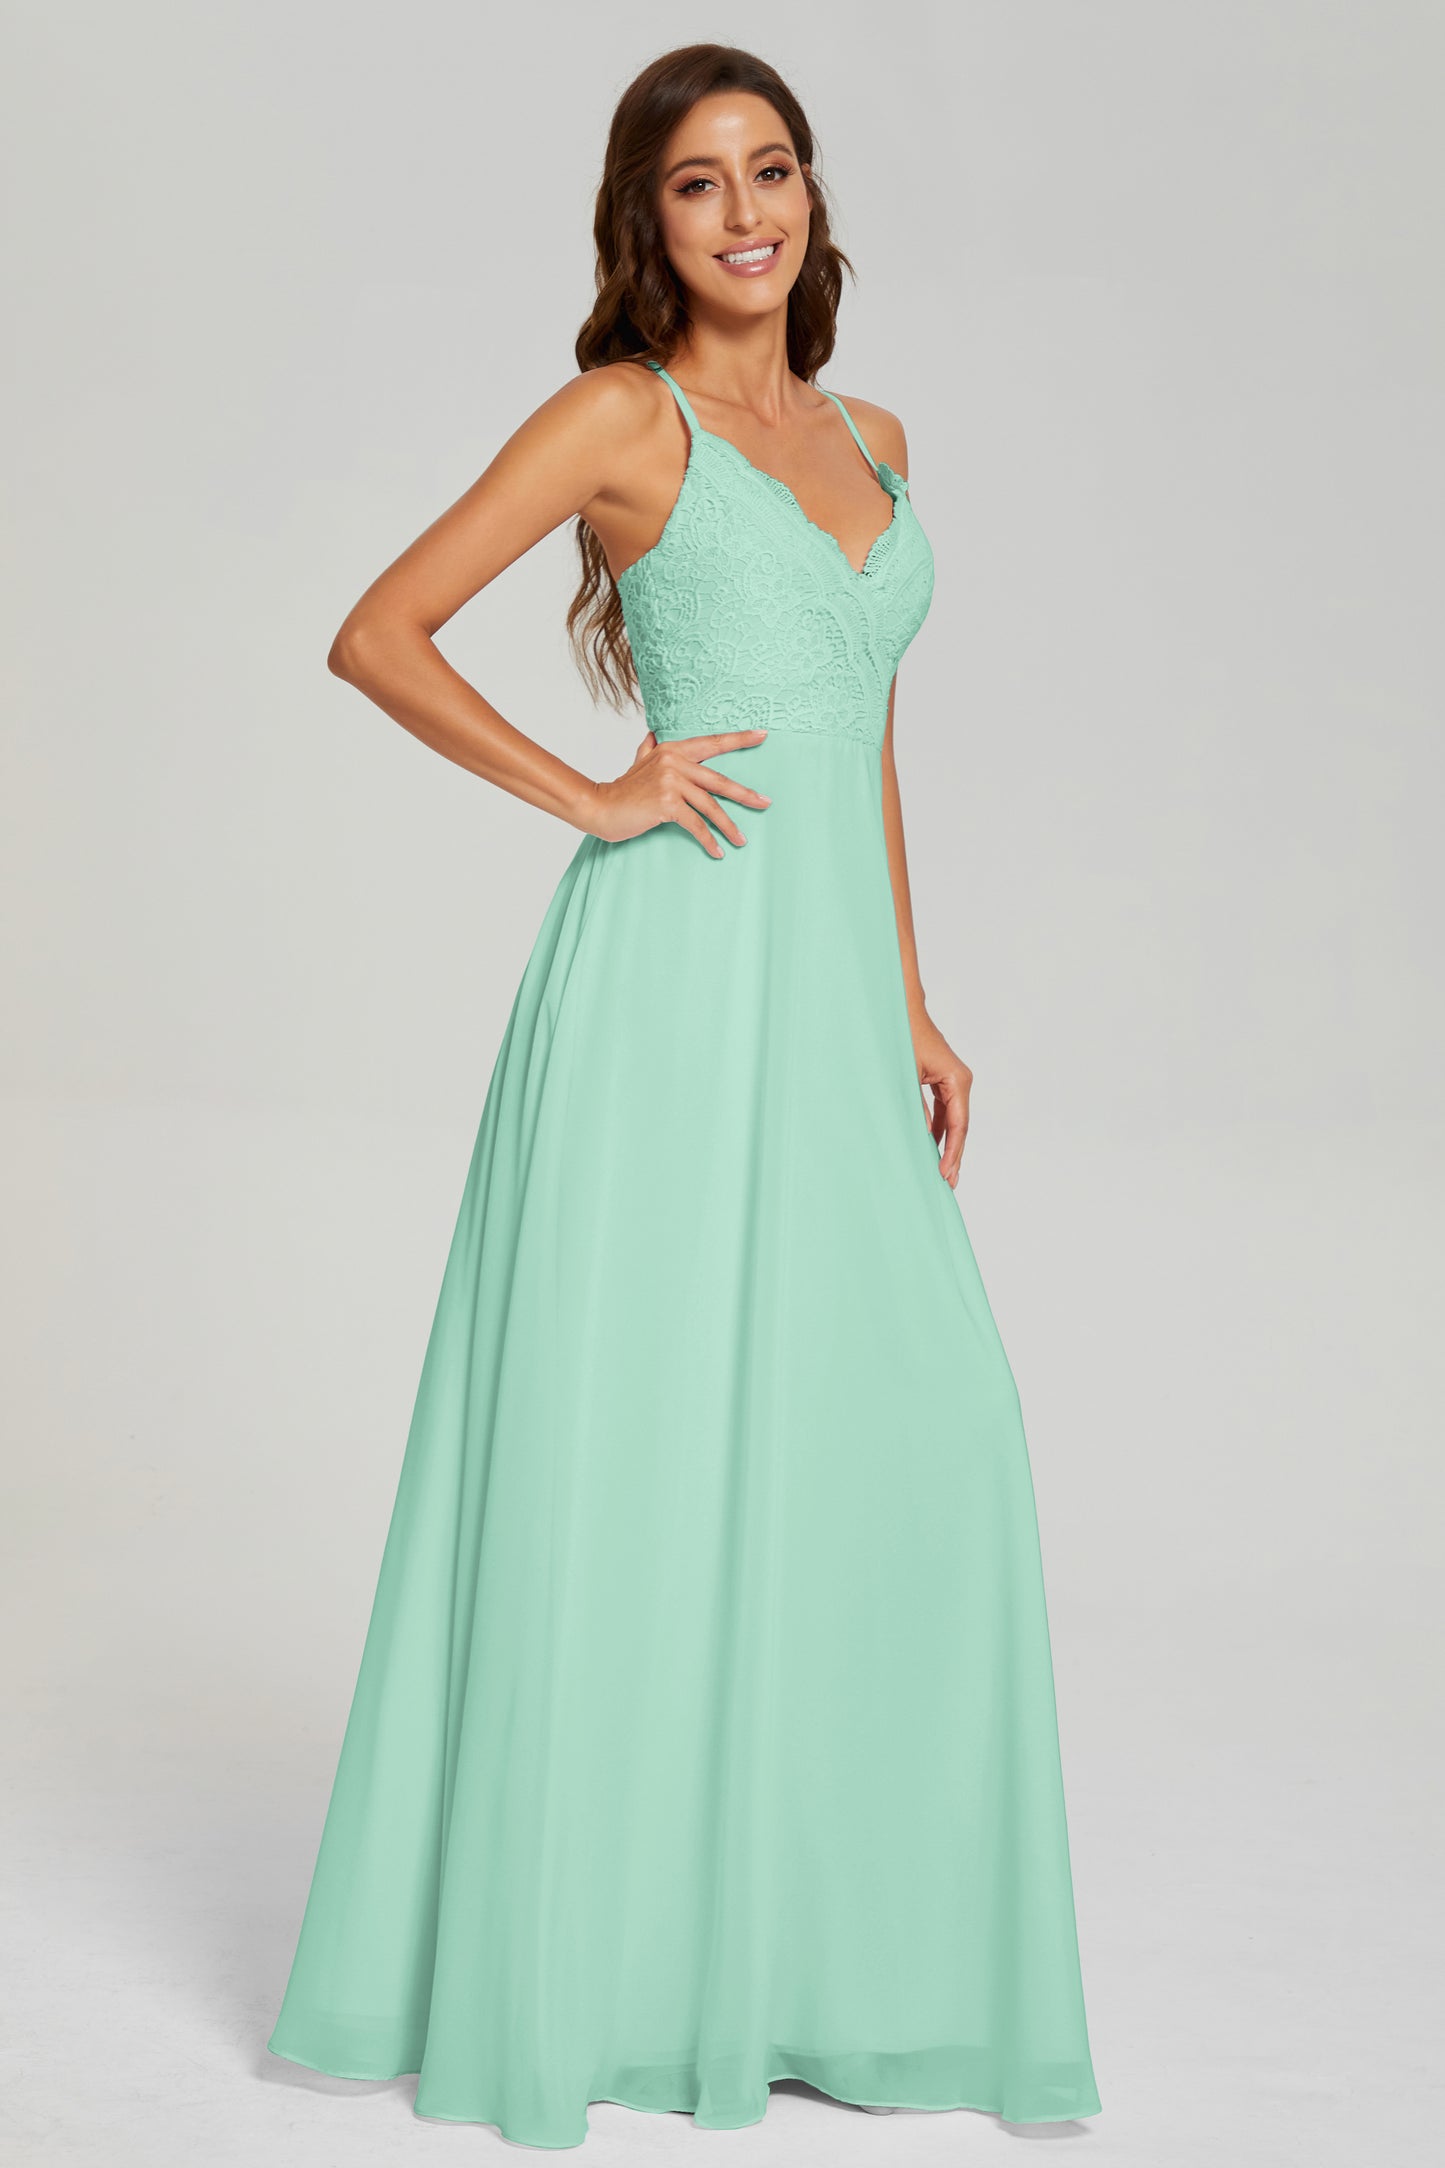 Backless Spaghetti Straps Lace Prom Dresses